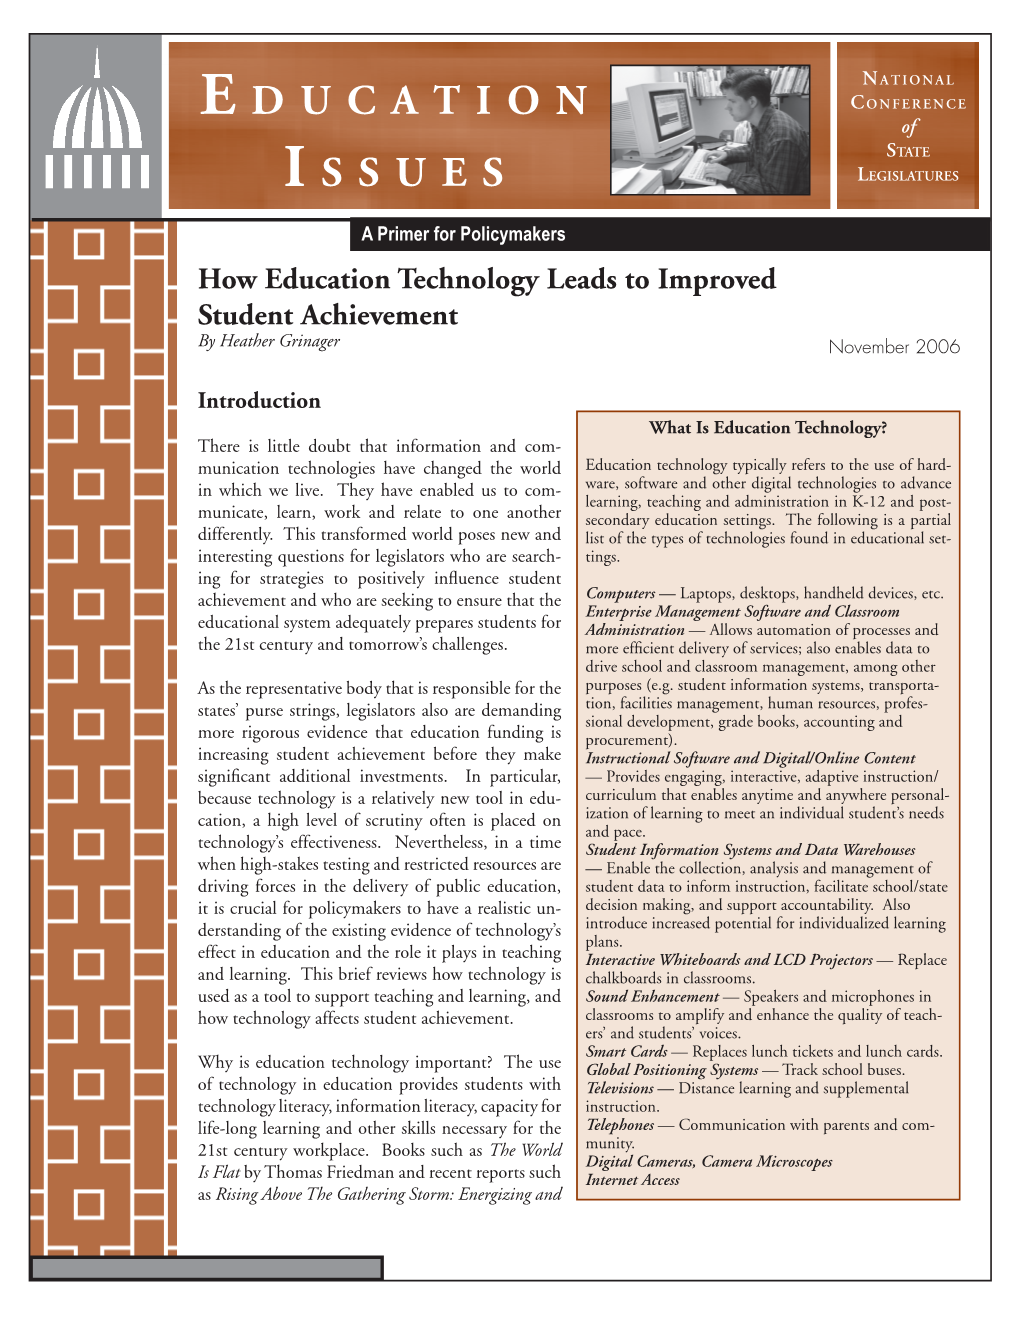 How Education Technology Leads to Improved Student Achievement by Heather Grinager November 2006